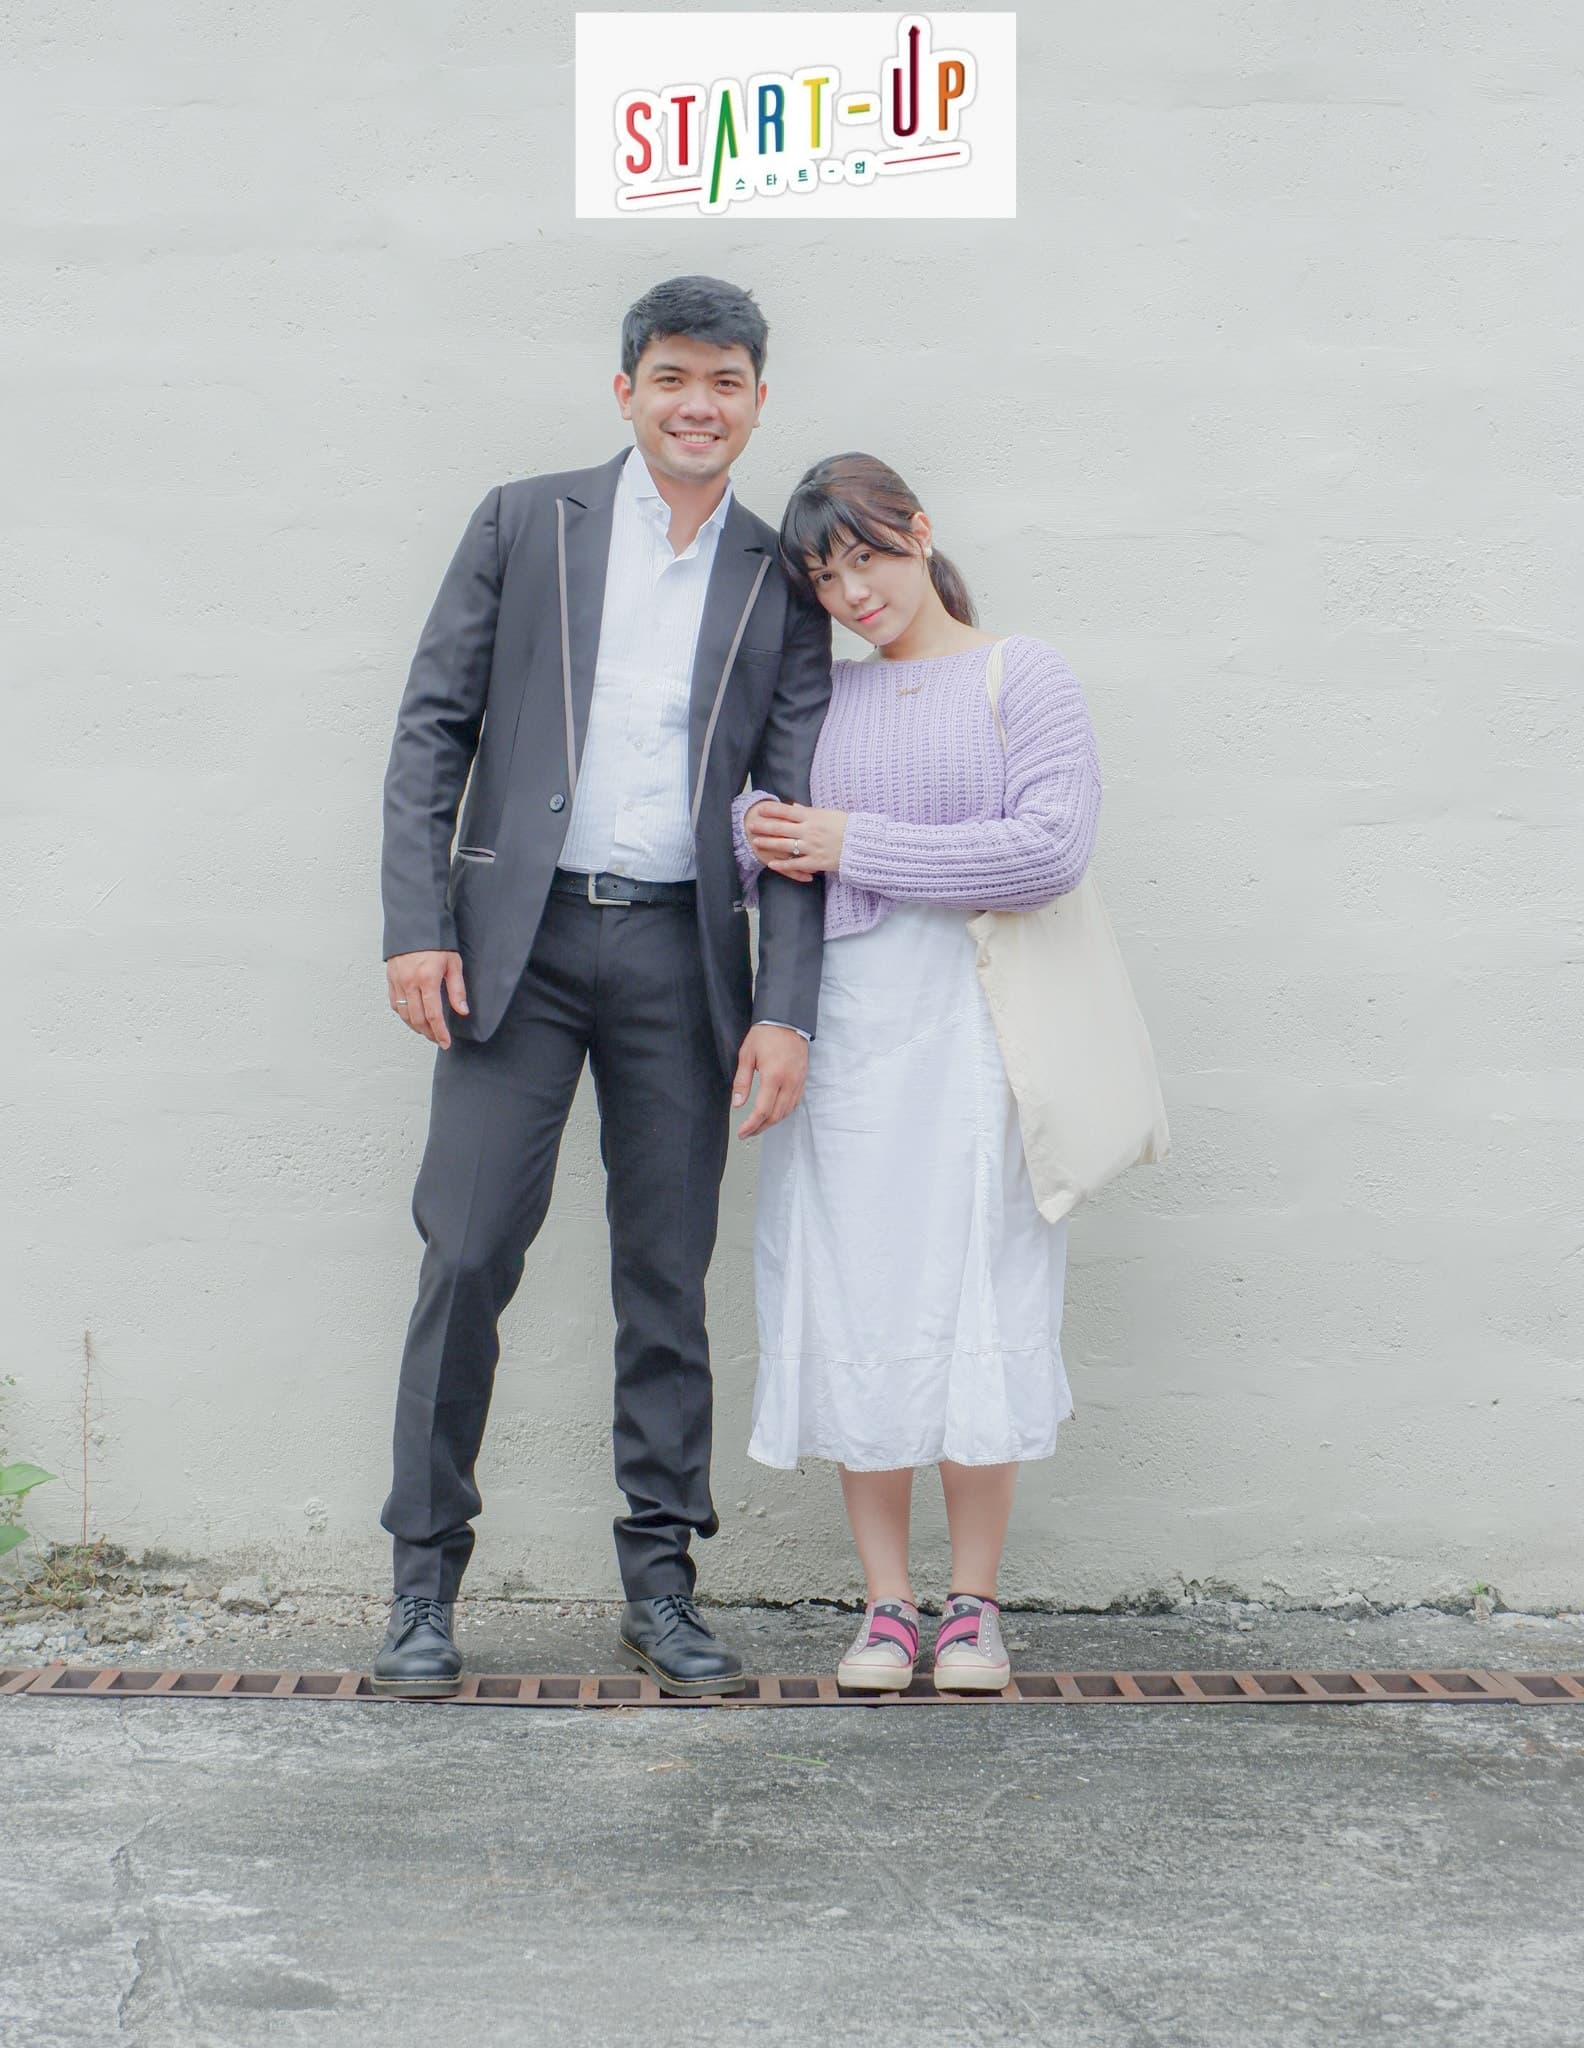 Pinoy couple's Start-Up-inspired prenup shoot